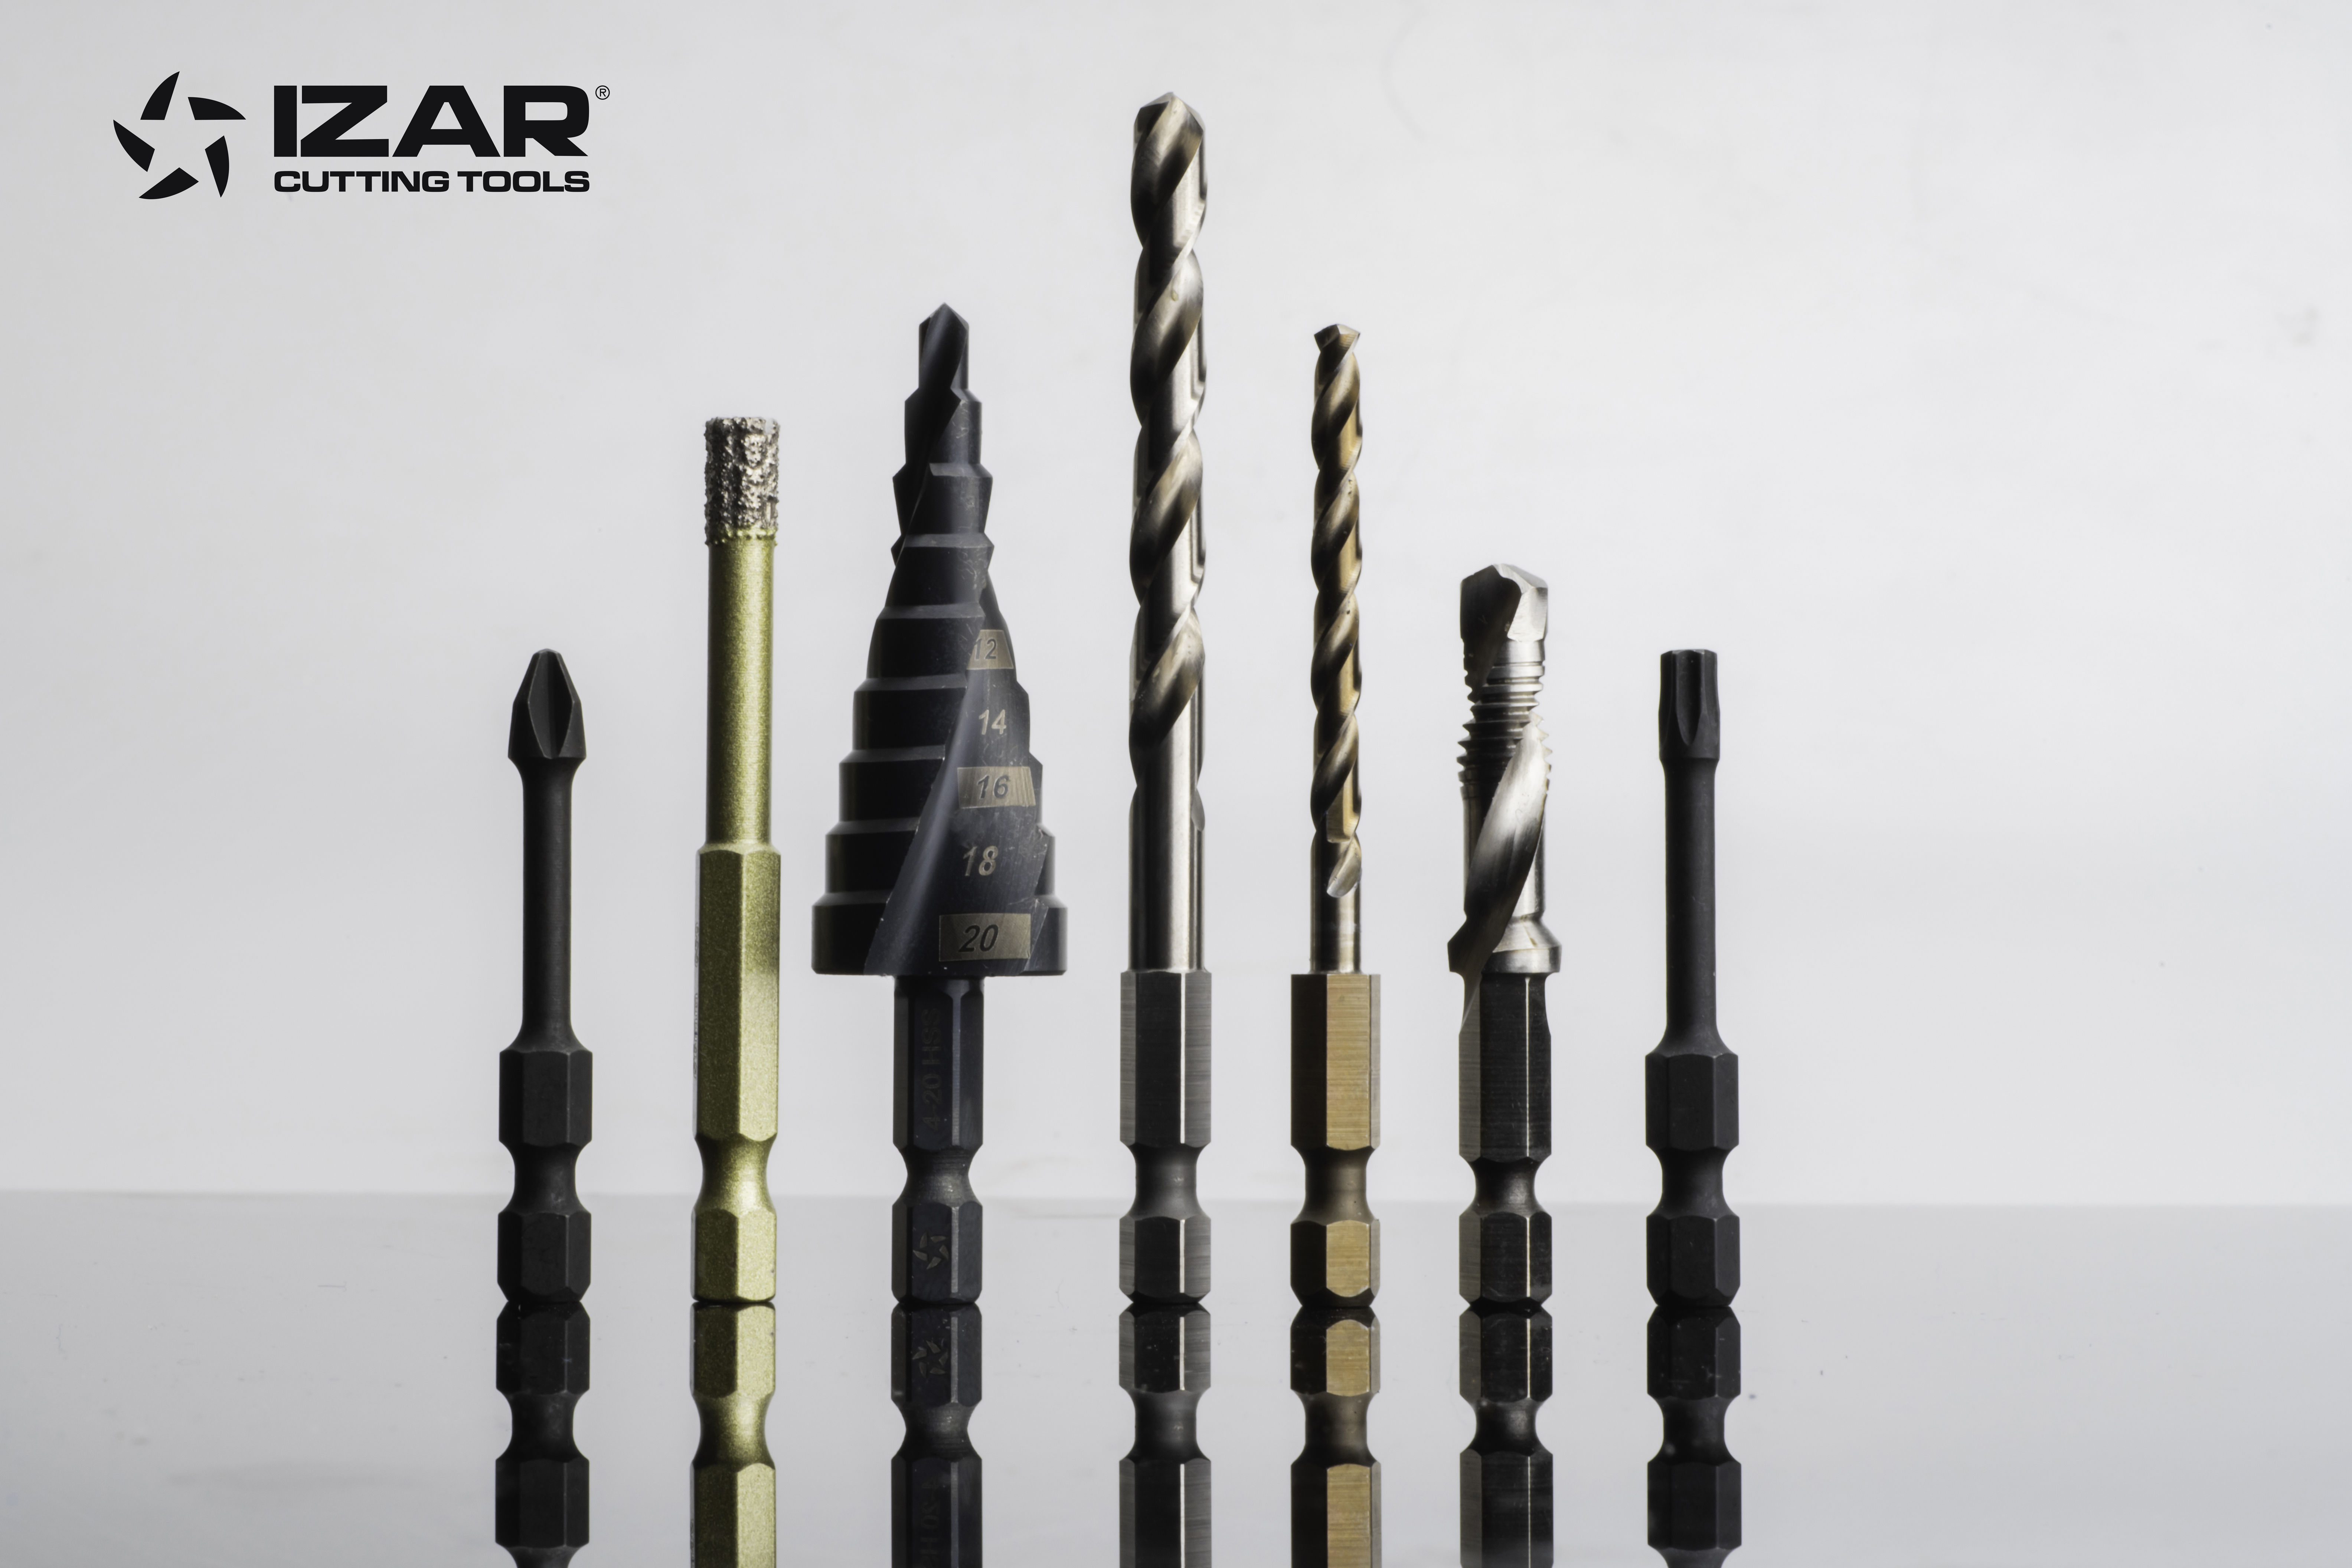 Discover IZAR impact screwdriver tools at its stand at Eisenwarenmesse